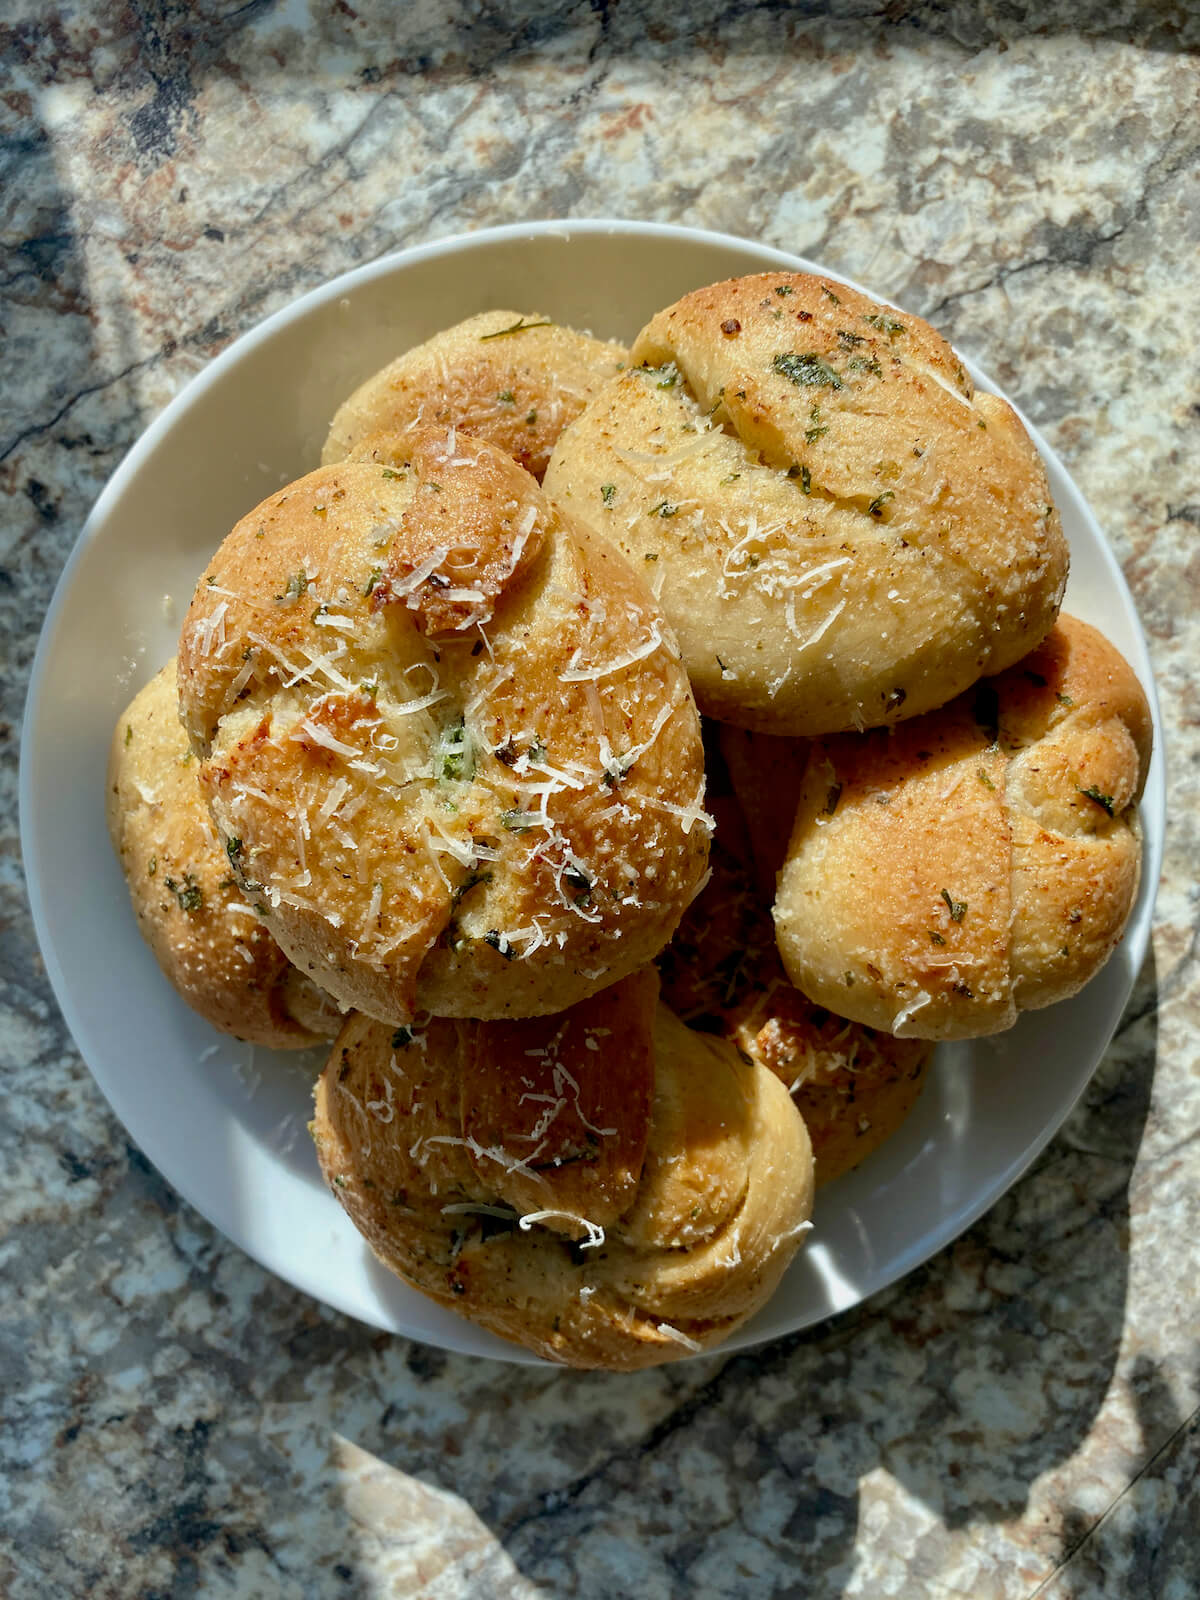 The finished sourdough garlic knots basted with more garlic butter and garnished with parmesan cheese piled on a small plate.